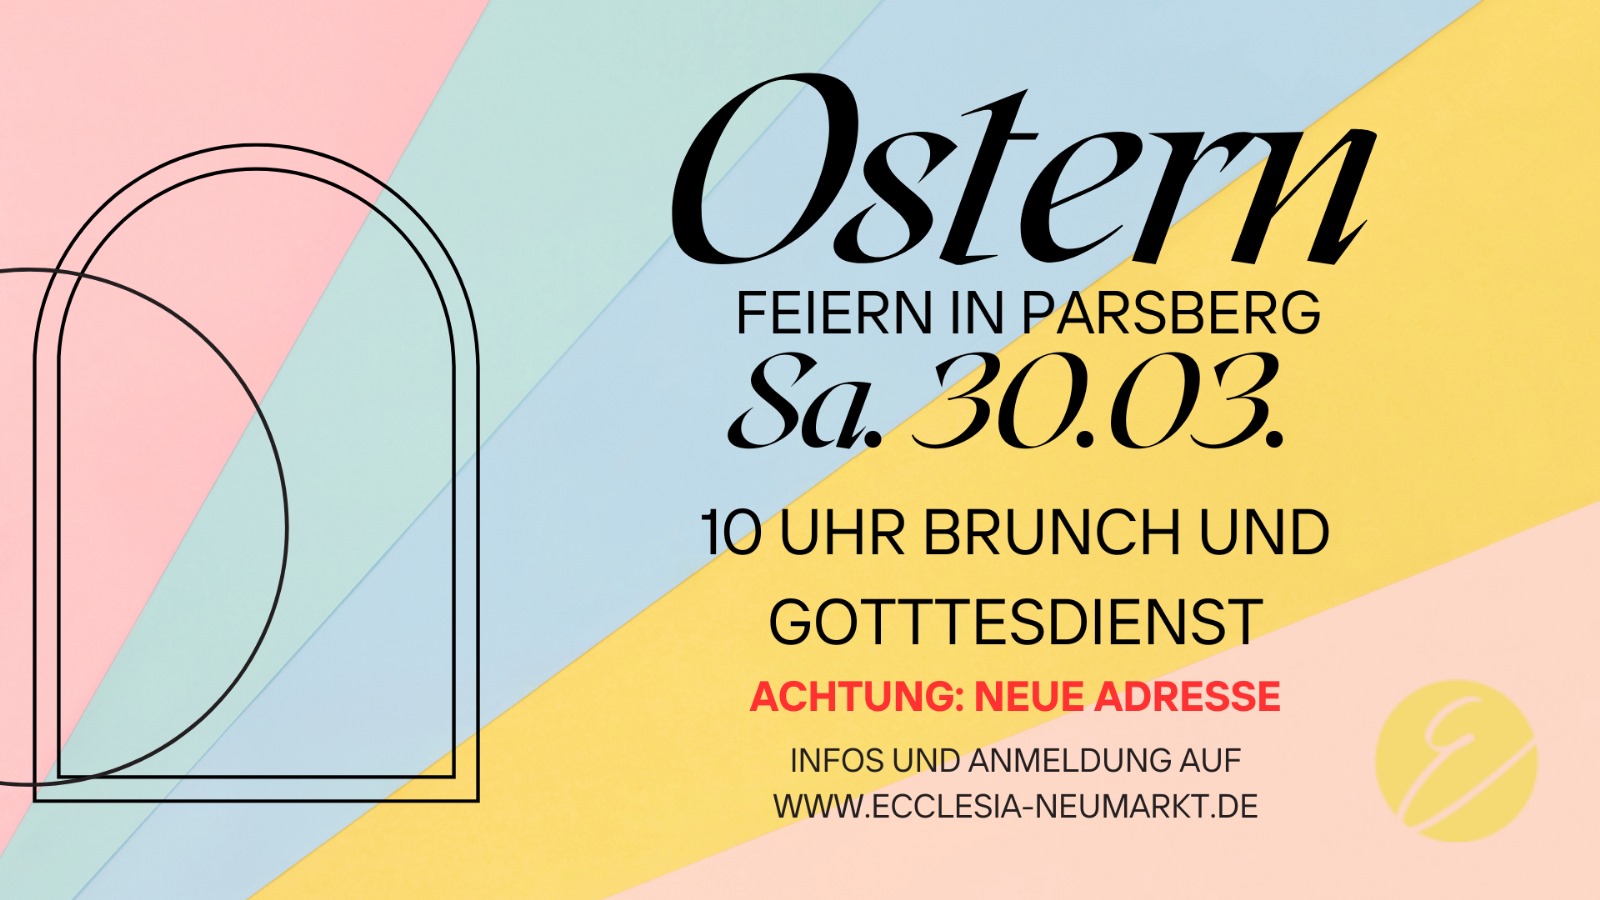 Osterbrunch in Parsberg am Ostersamstag